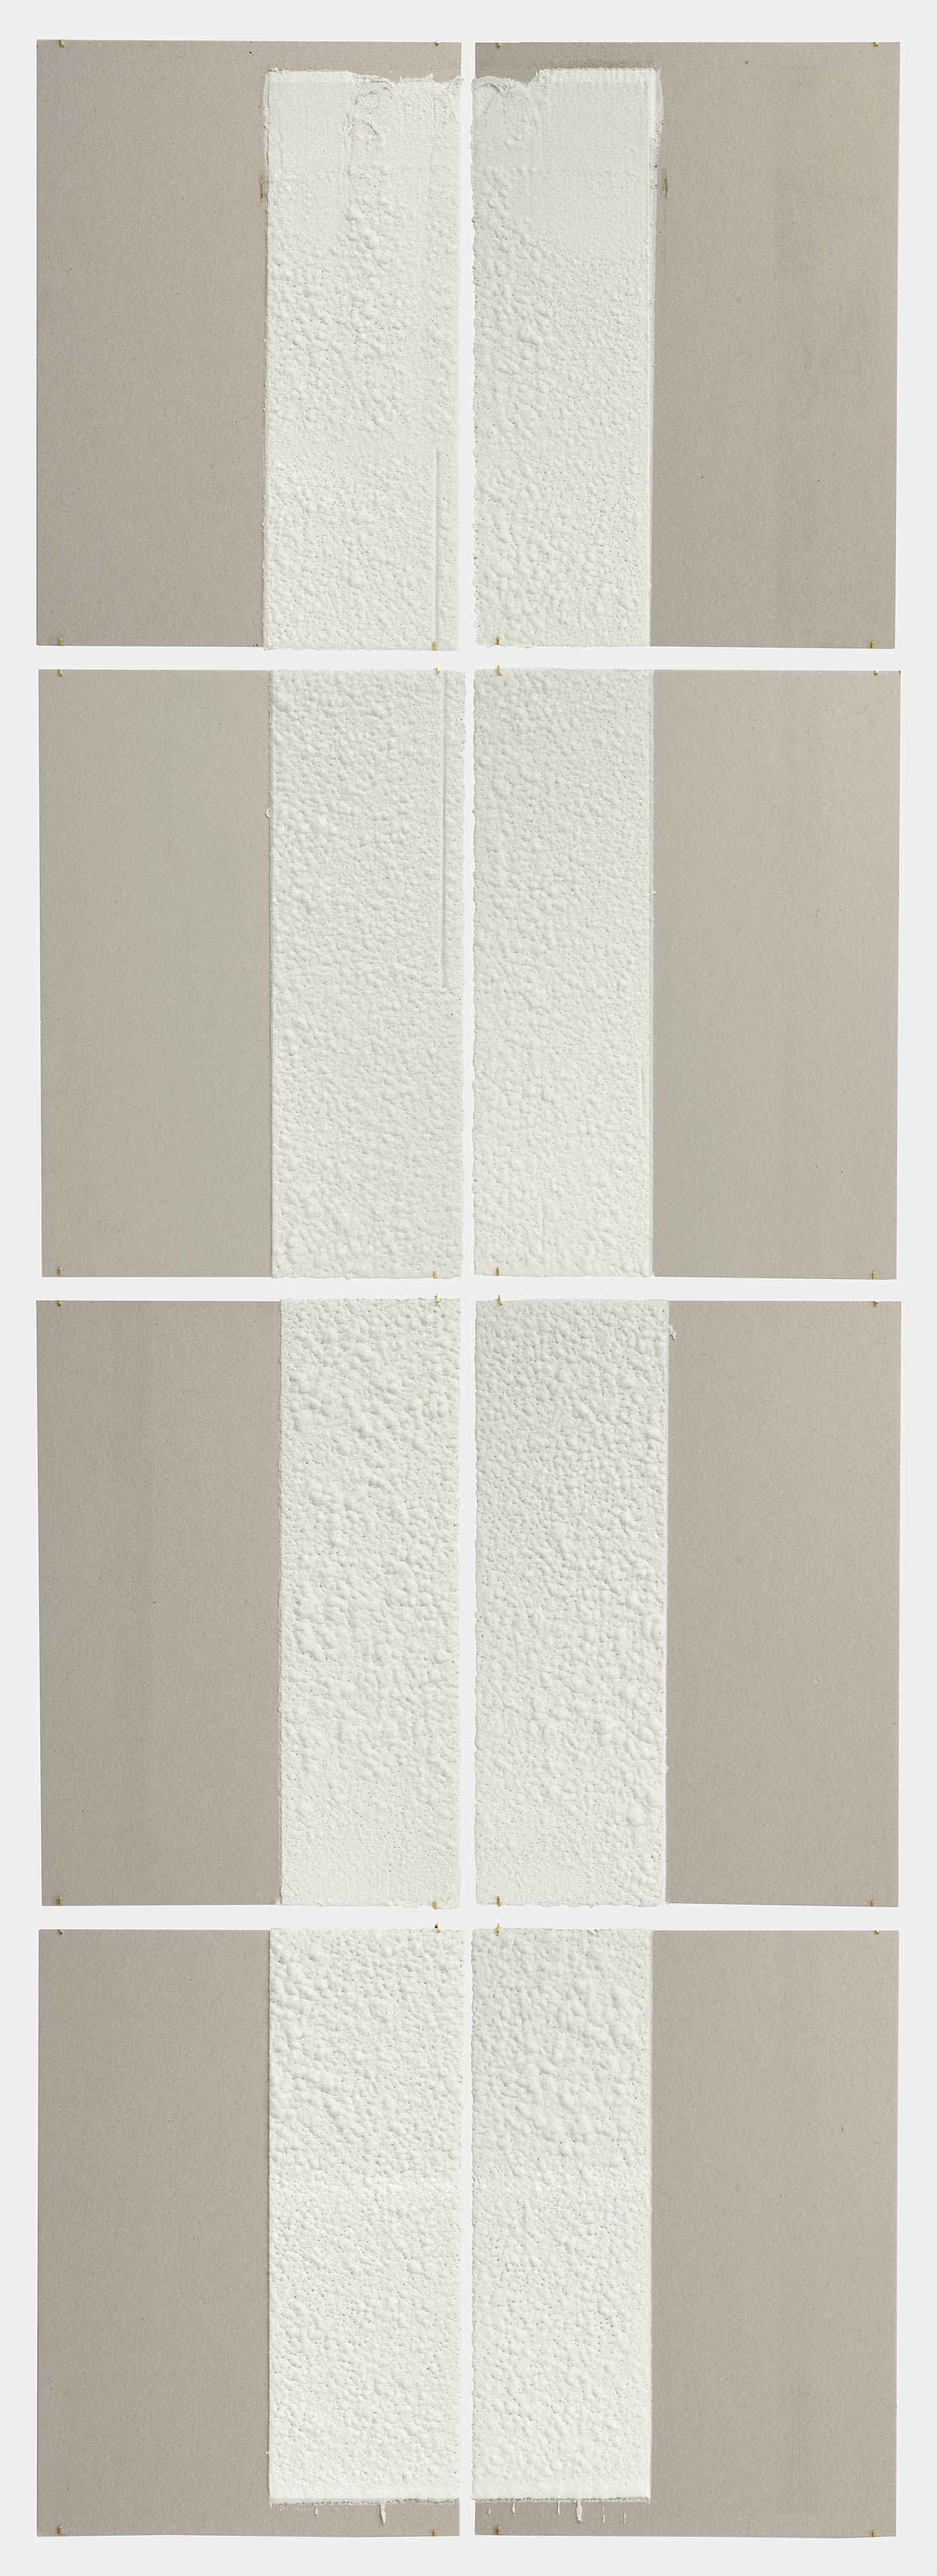   12in (section) (W), 2.27mm (T), White, Crosswalk, Manual marking, Lispenard St, Church St int,  2018  Set of 8 works Thermoplastic paint and reflective glass particles on grey boards 50 x 35 cm each 